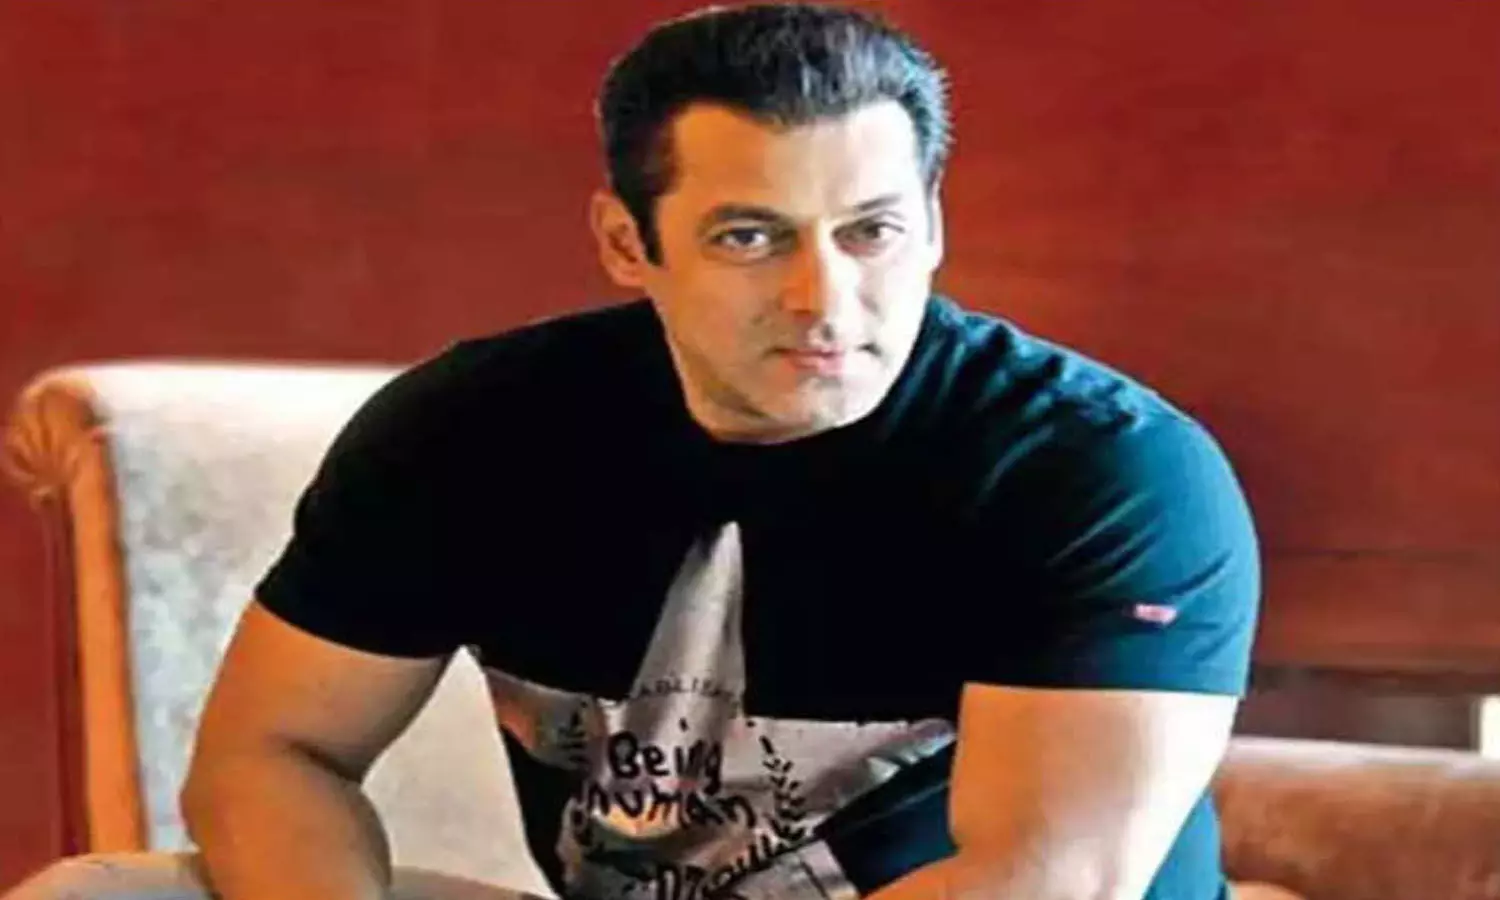 Salman Khan takes charge to distribute food kits amid second COVID-19 wave